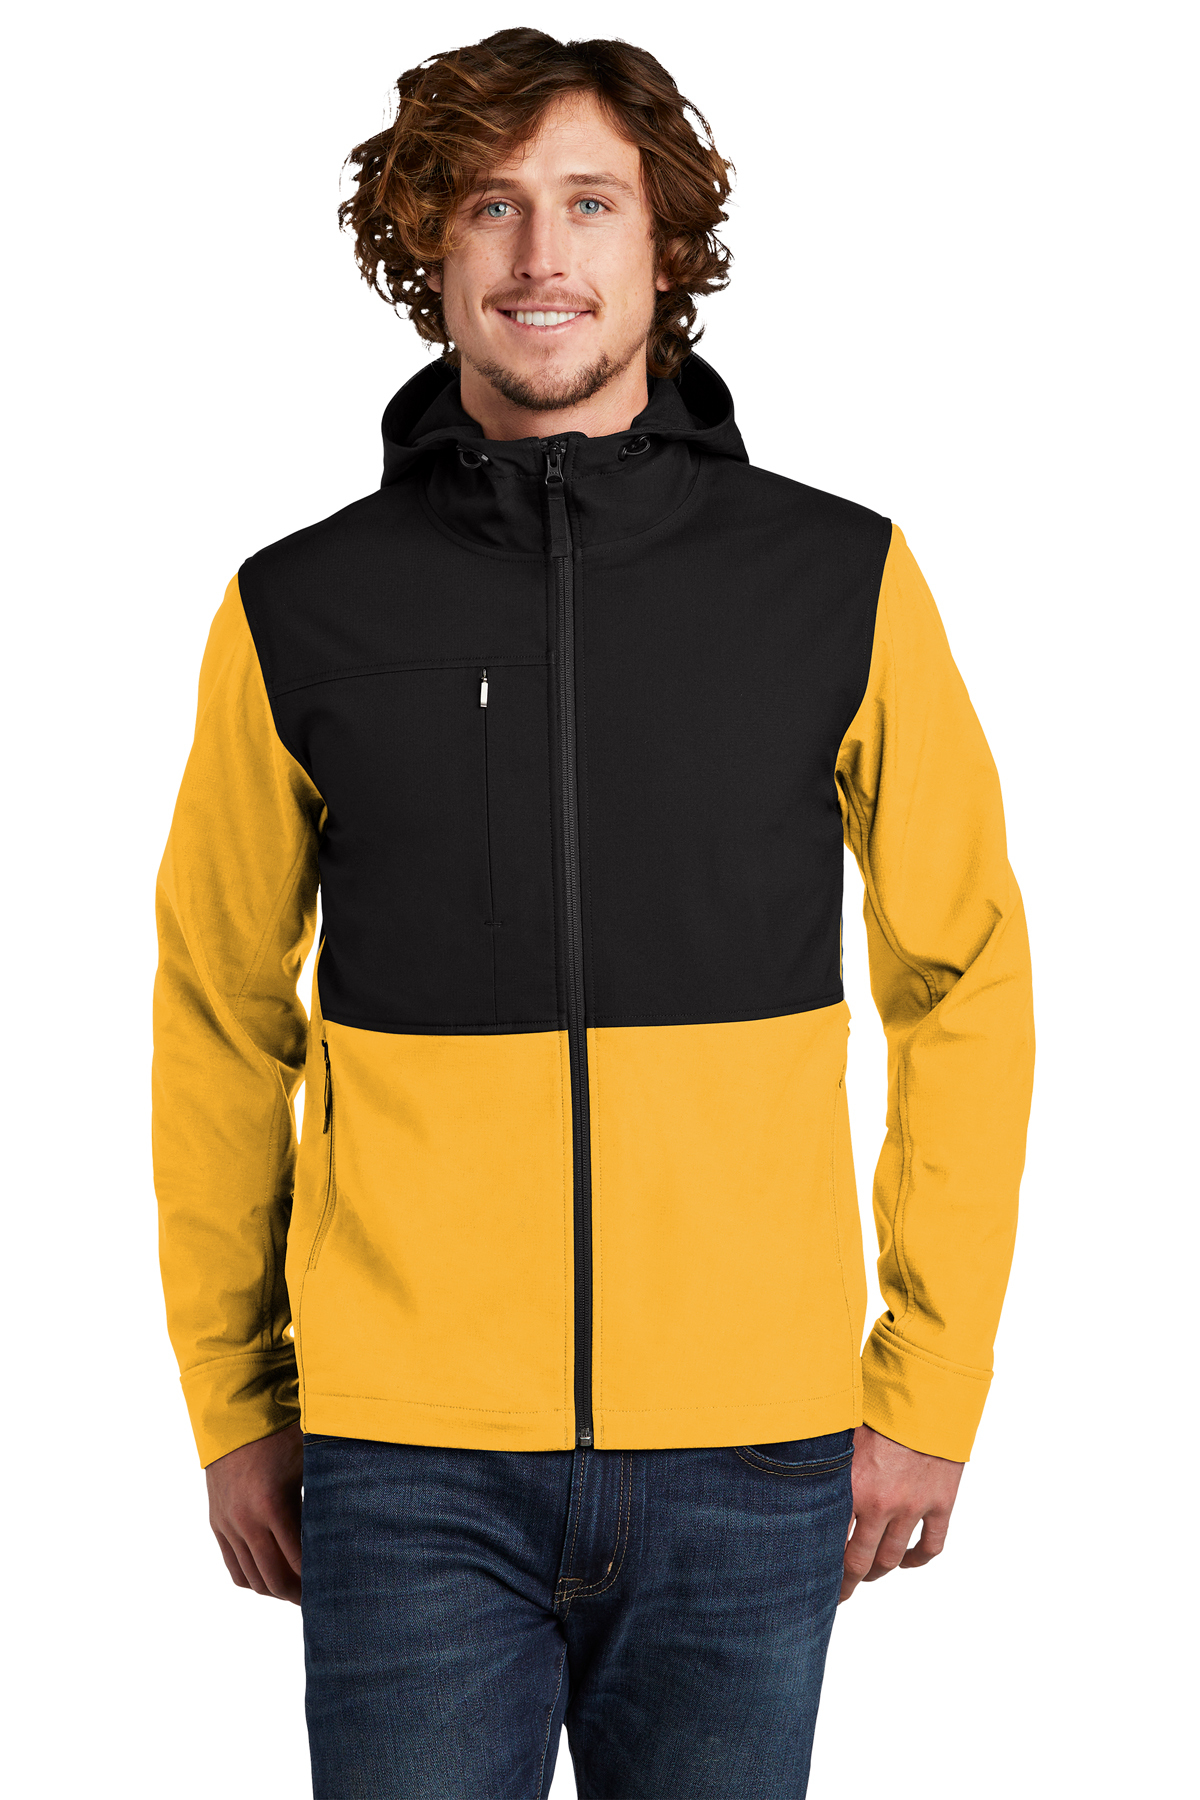 hood for north face jacket